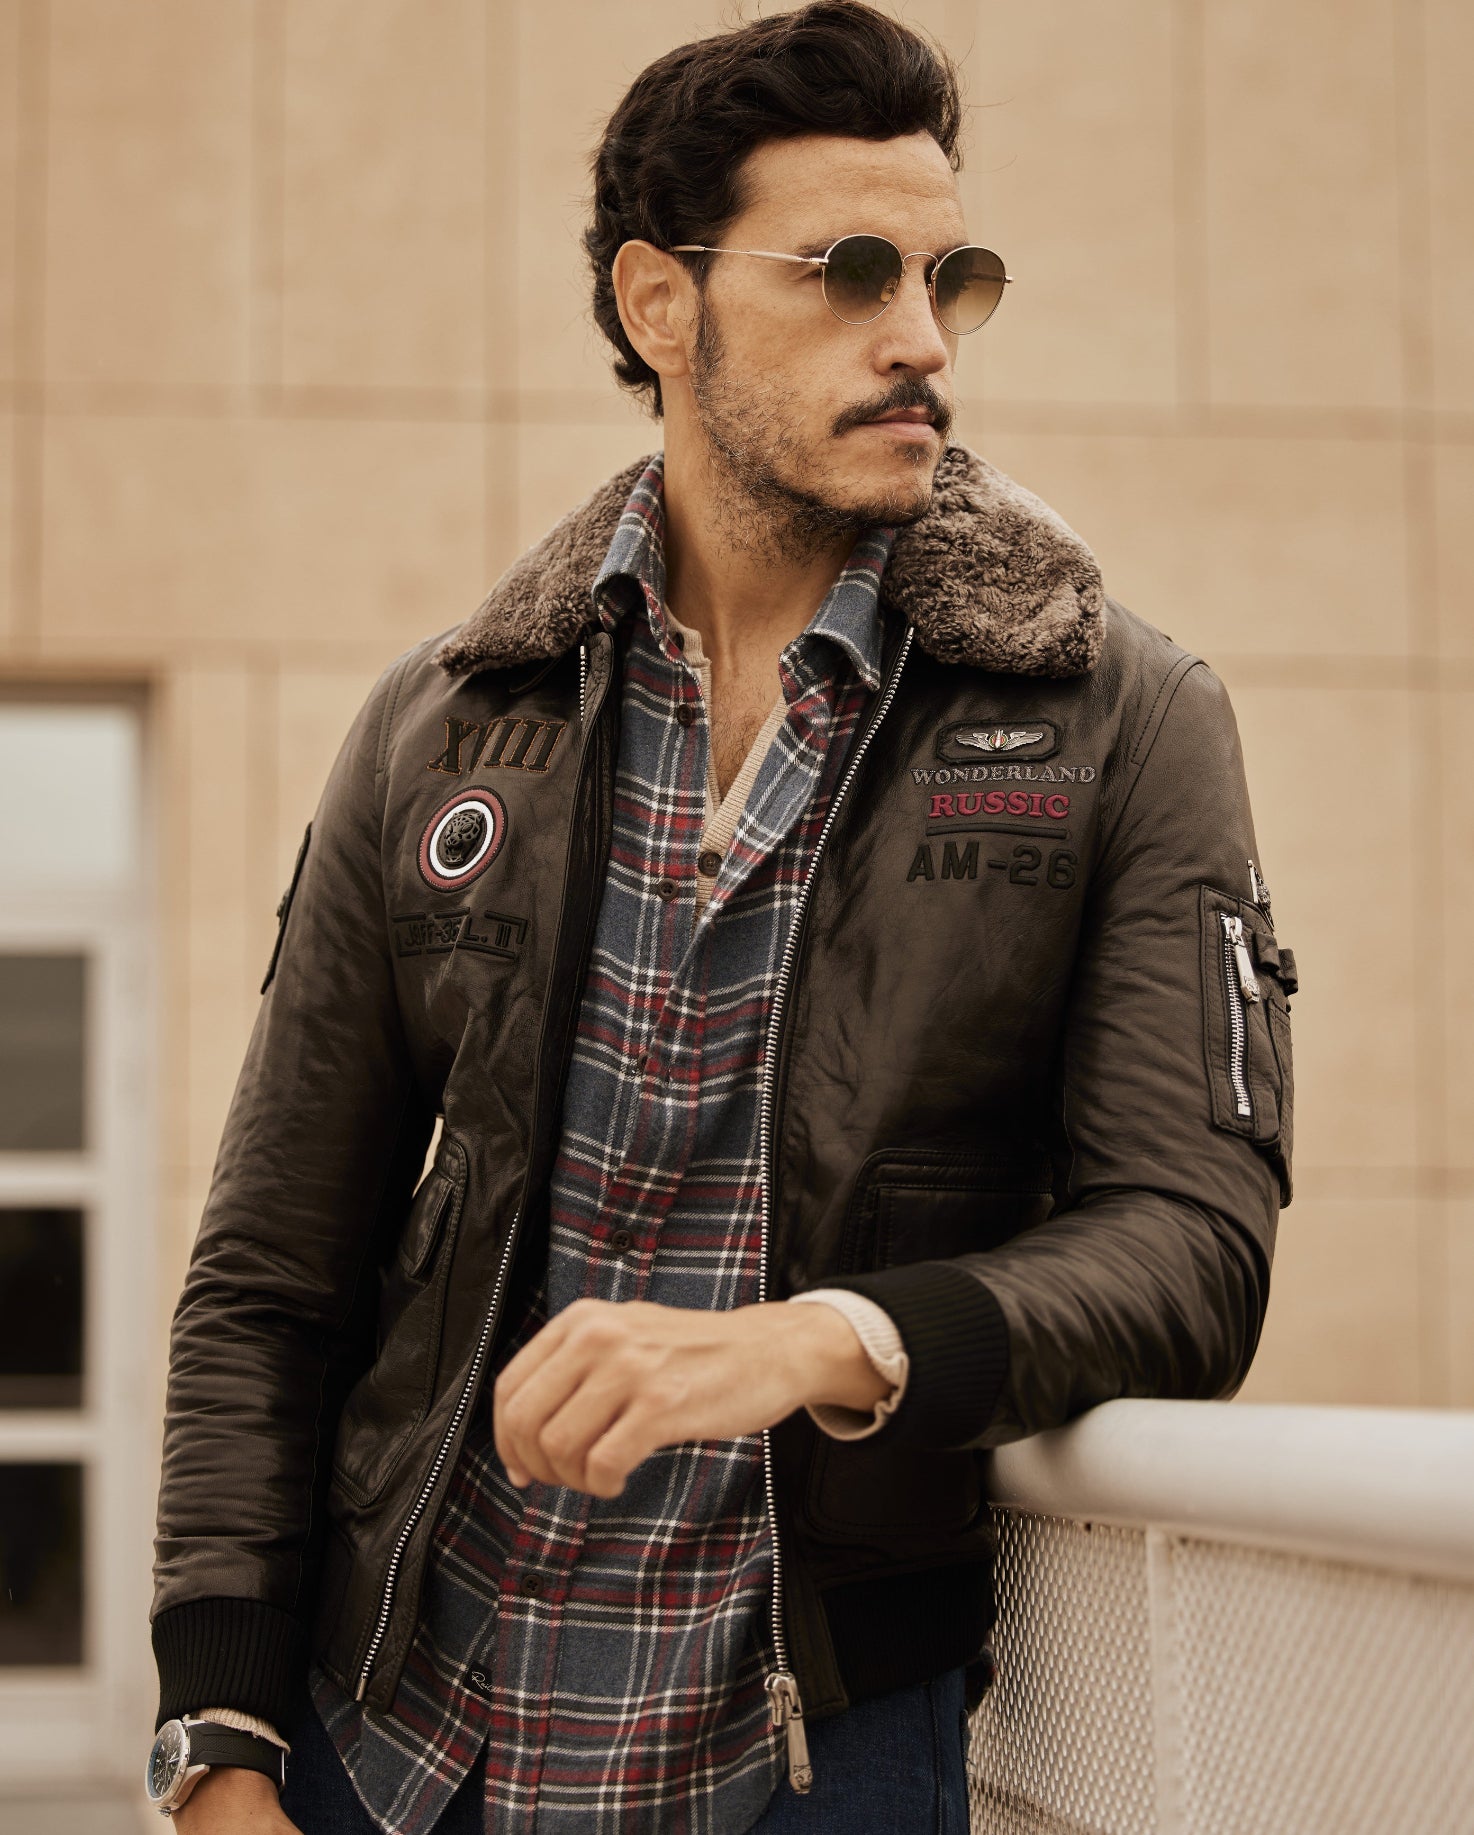 Latest Ernest W. Baker Leather Jackets arrivals - Men - 3 products |  FASHIOLA INDIA